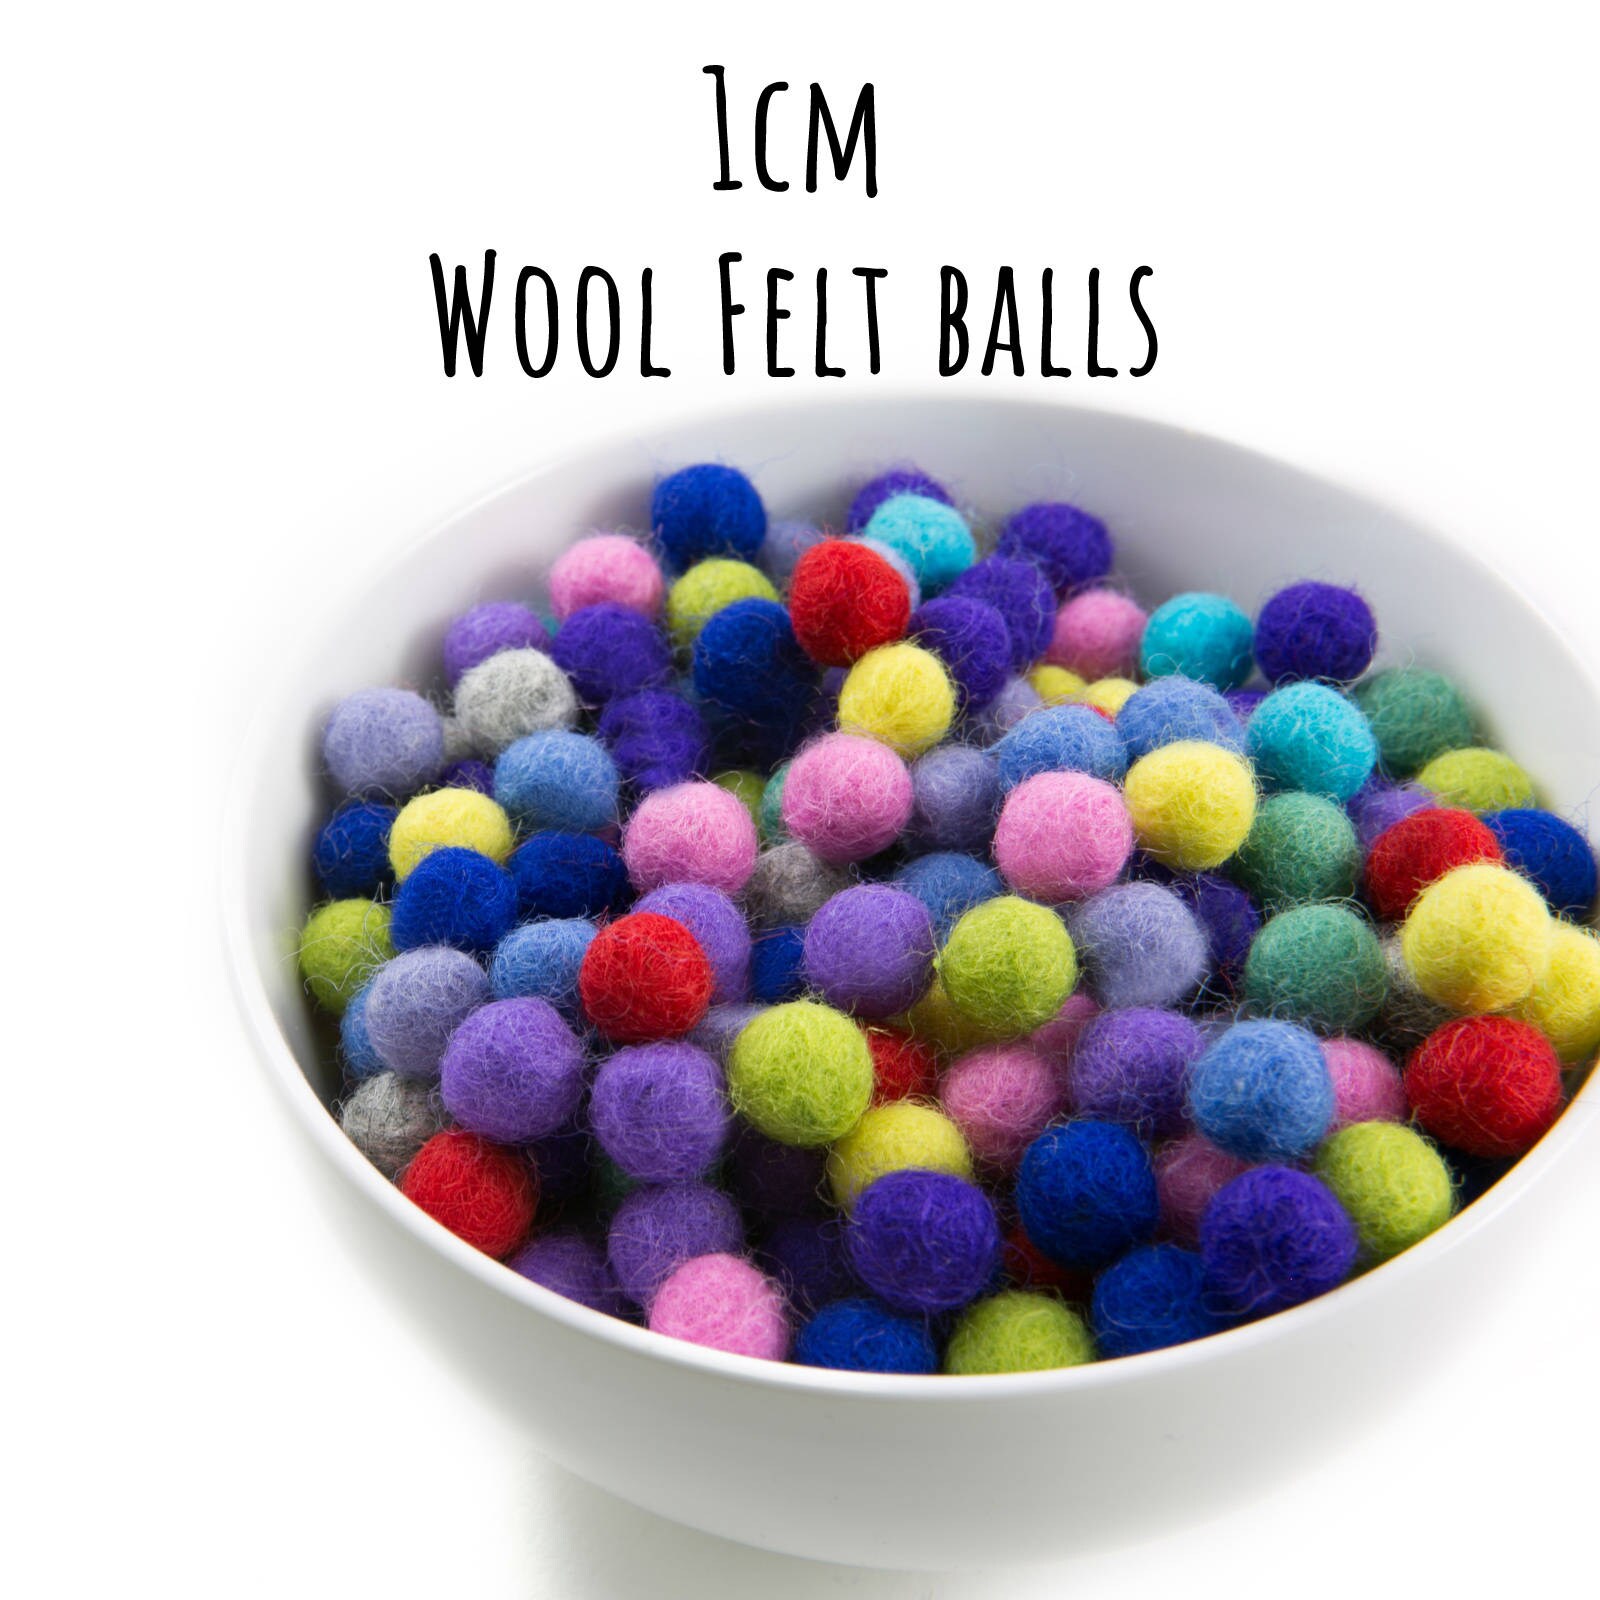 Glaciart One Wool Felt Balls, Felt Ball (60 Pieces) 2.5 Centimeters - 1 inch, Handmade Felted Pure White Color - Bulk Small Puff for Felting and Garl